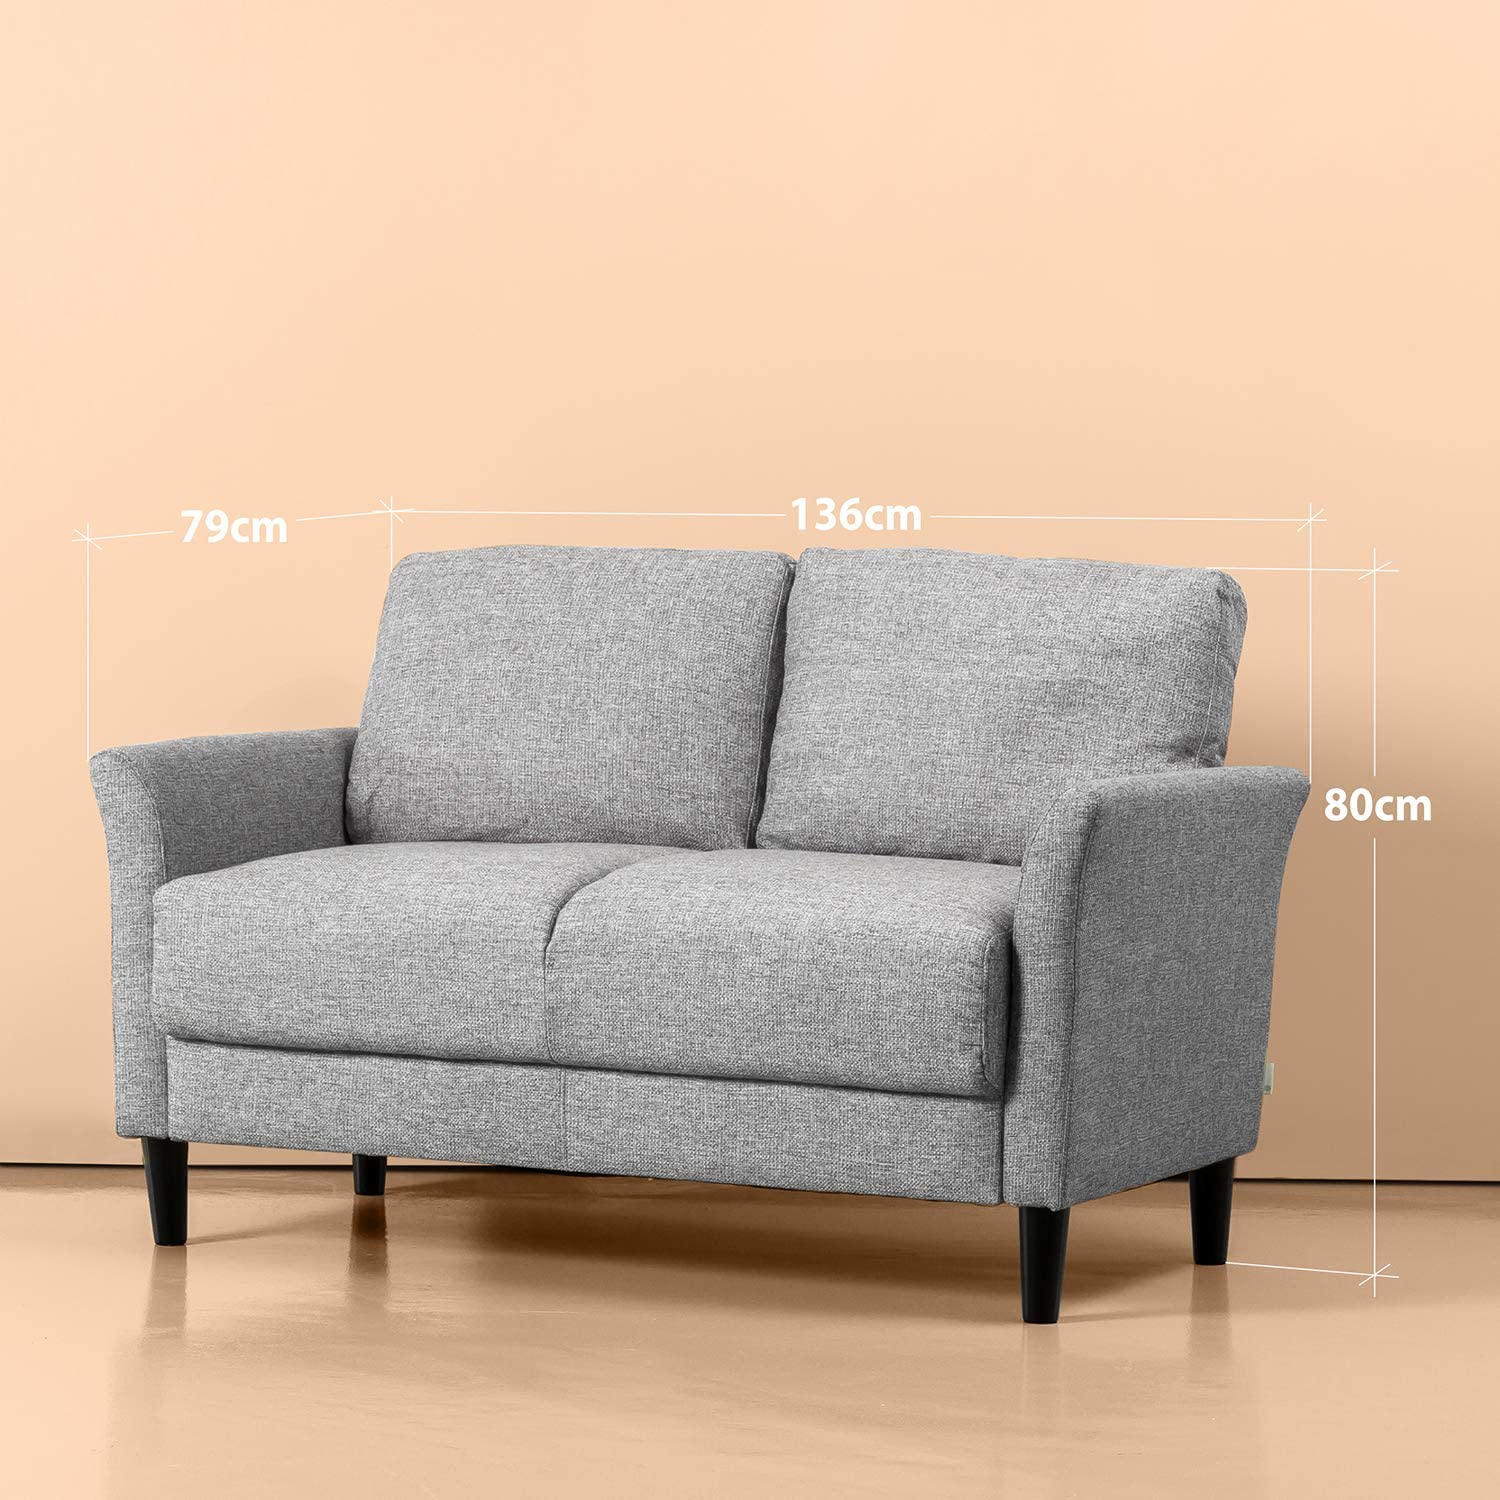 Zinus Classic Sofa 2 Seater Loveseat Fabric Chair Lounge Couch in Soft Grey